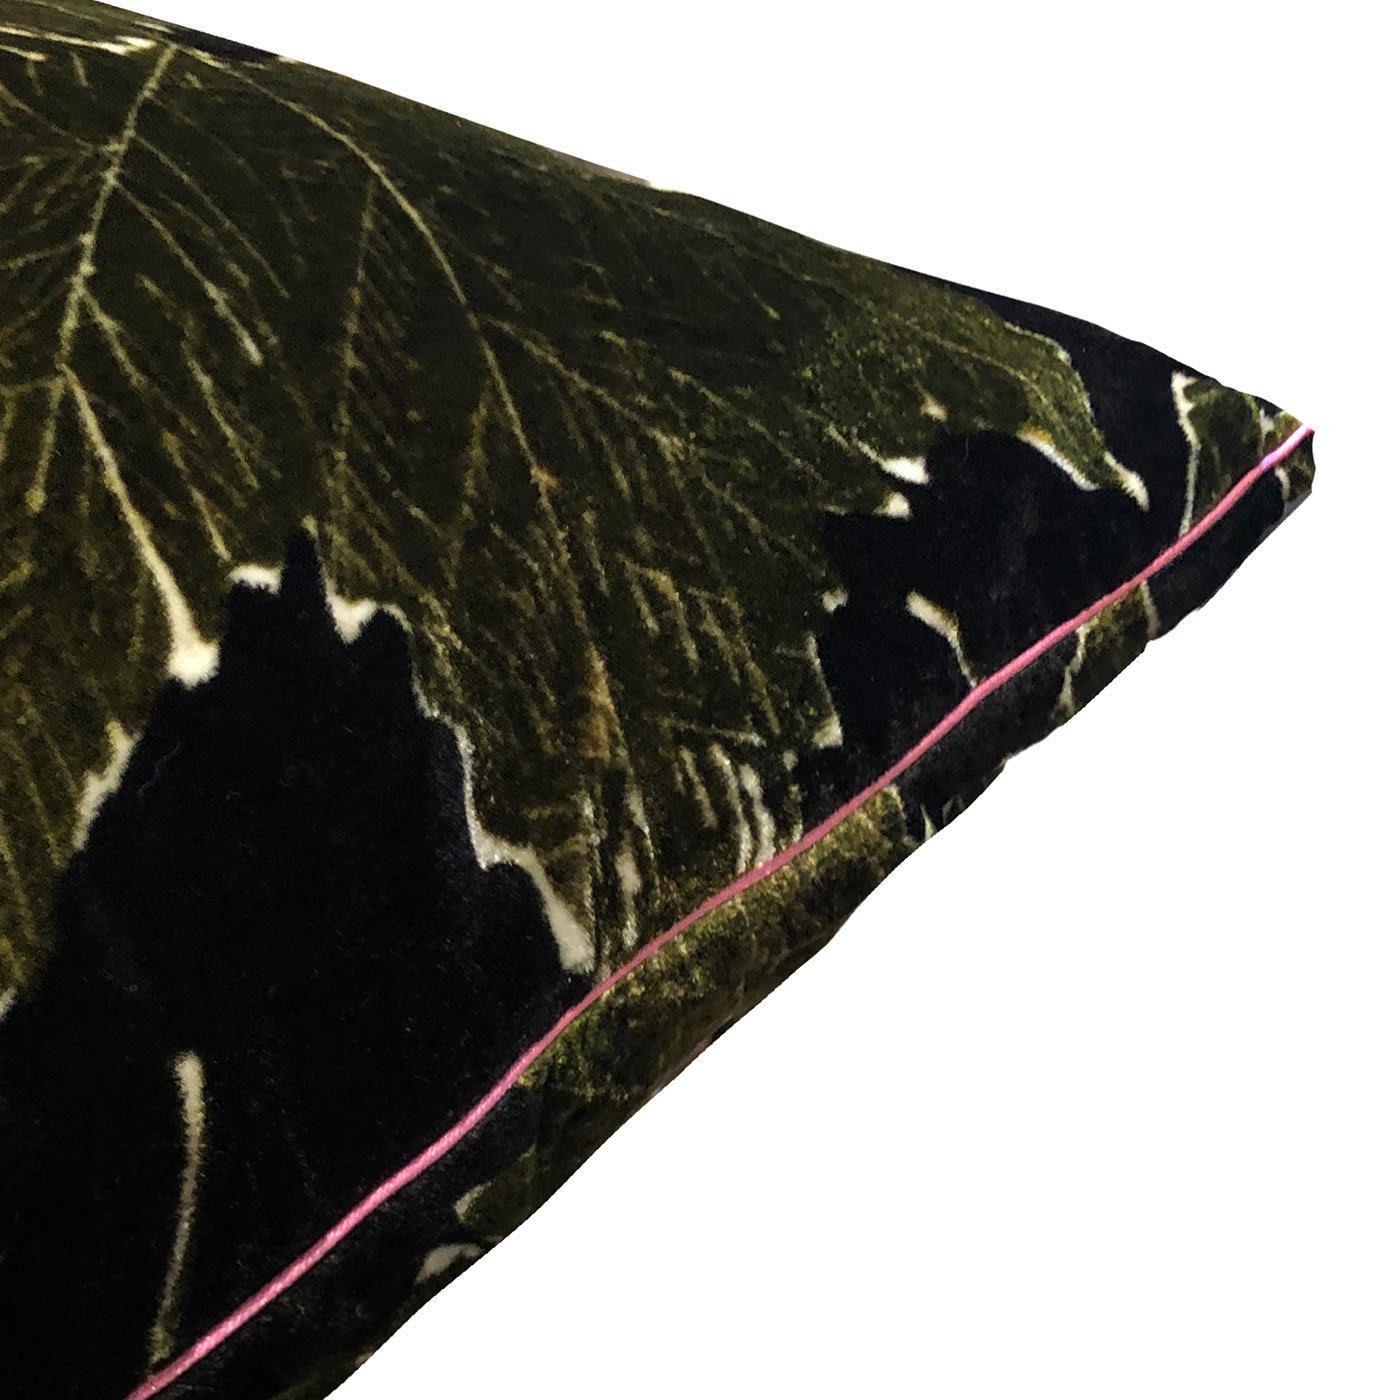 Camouflage Brown Velvet Cushion with Green Leaf  - Colomba Leddi